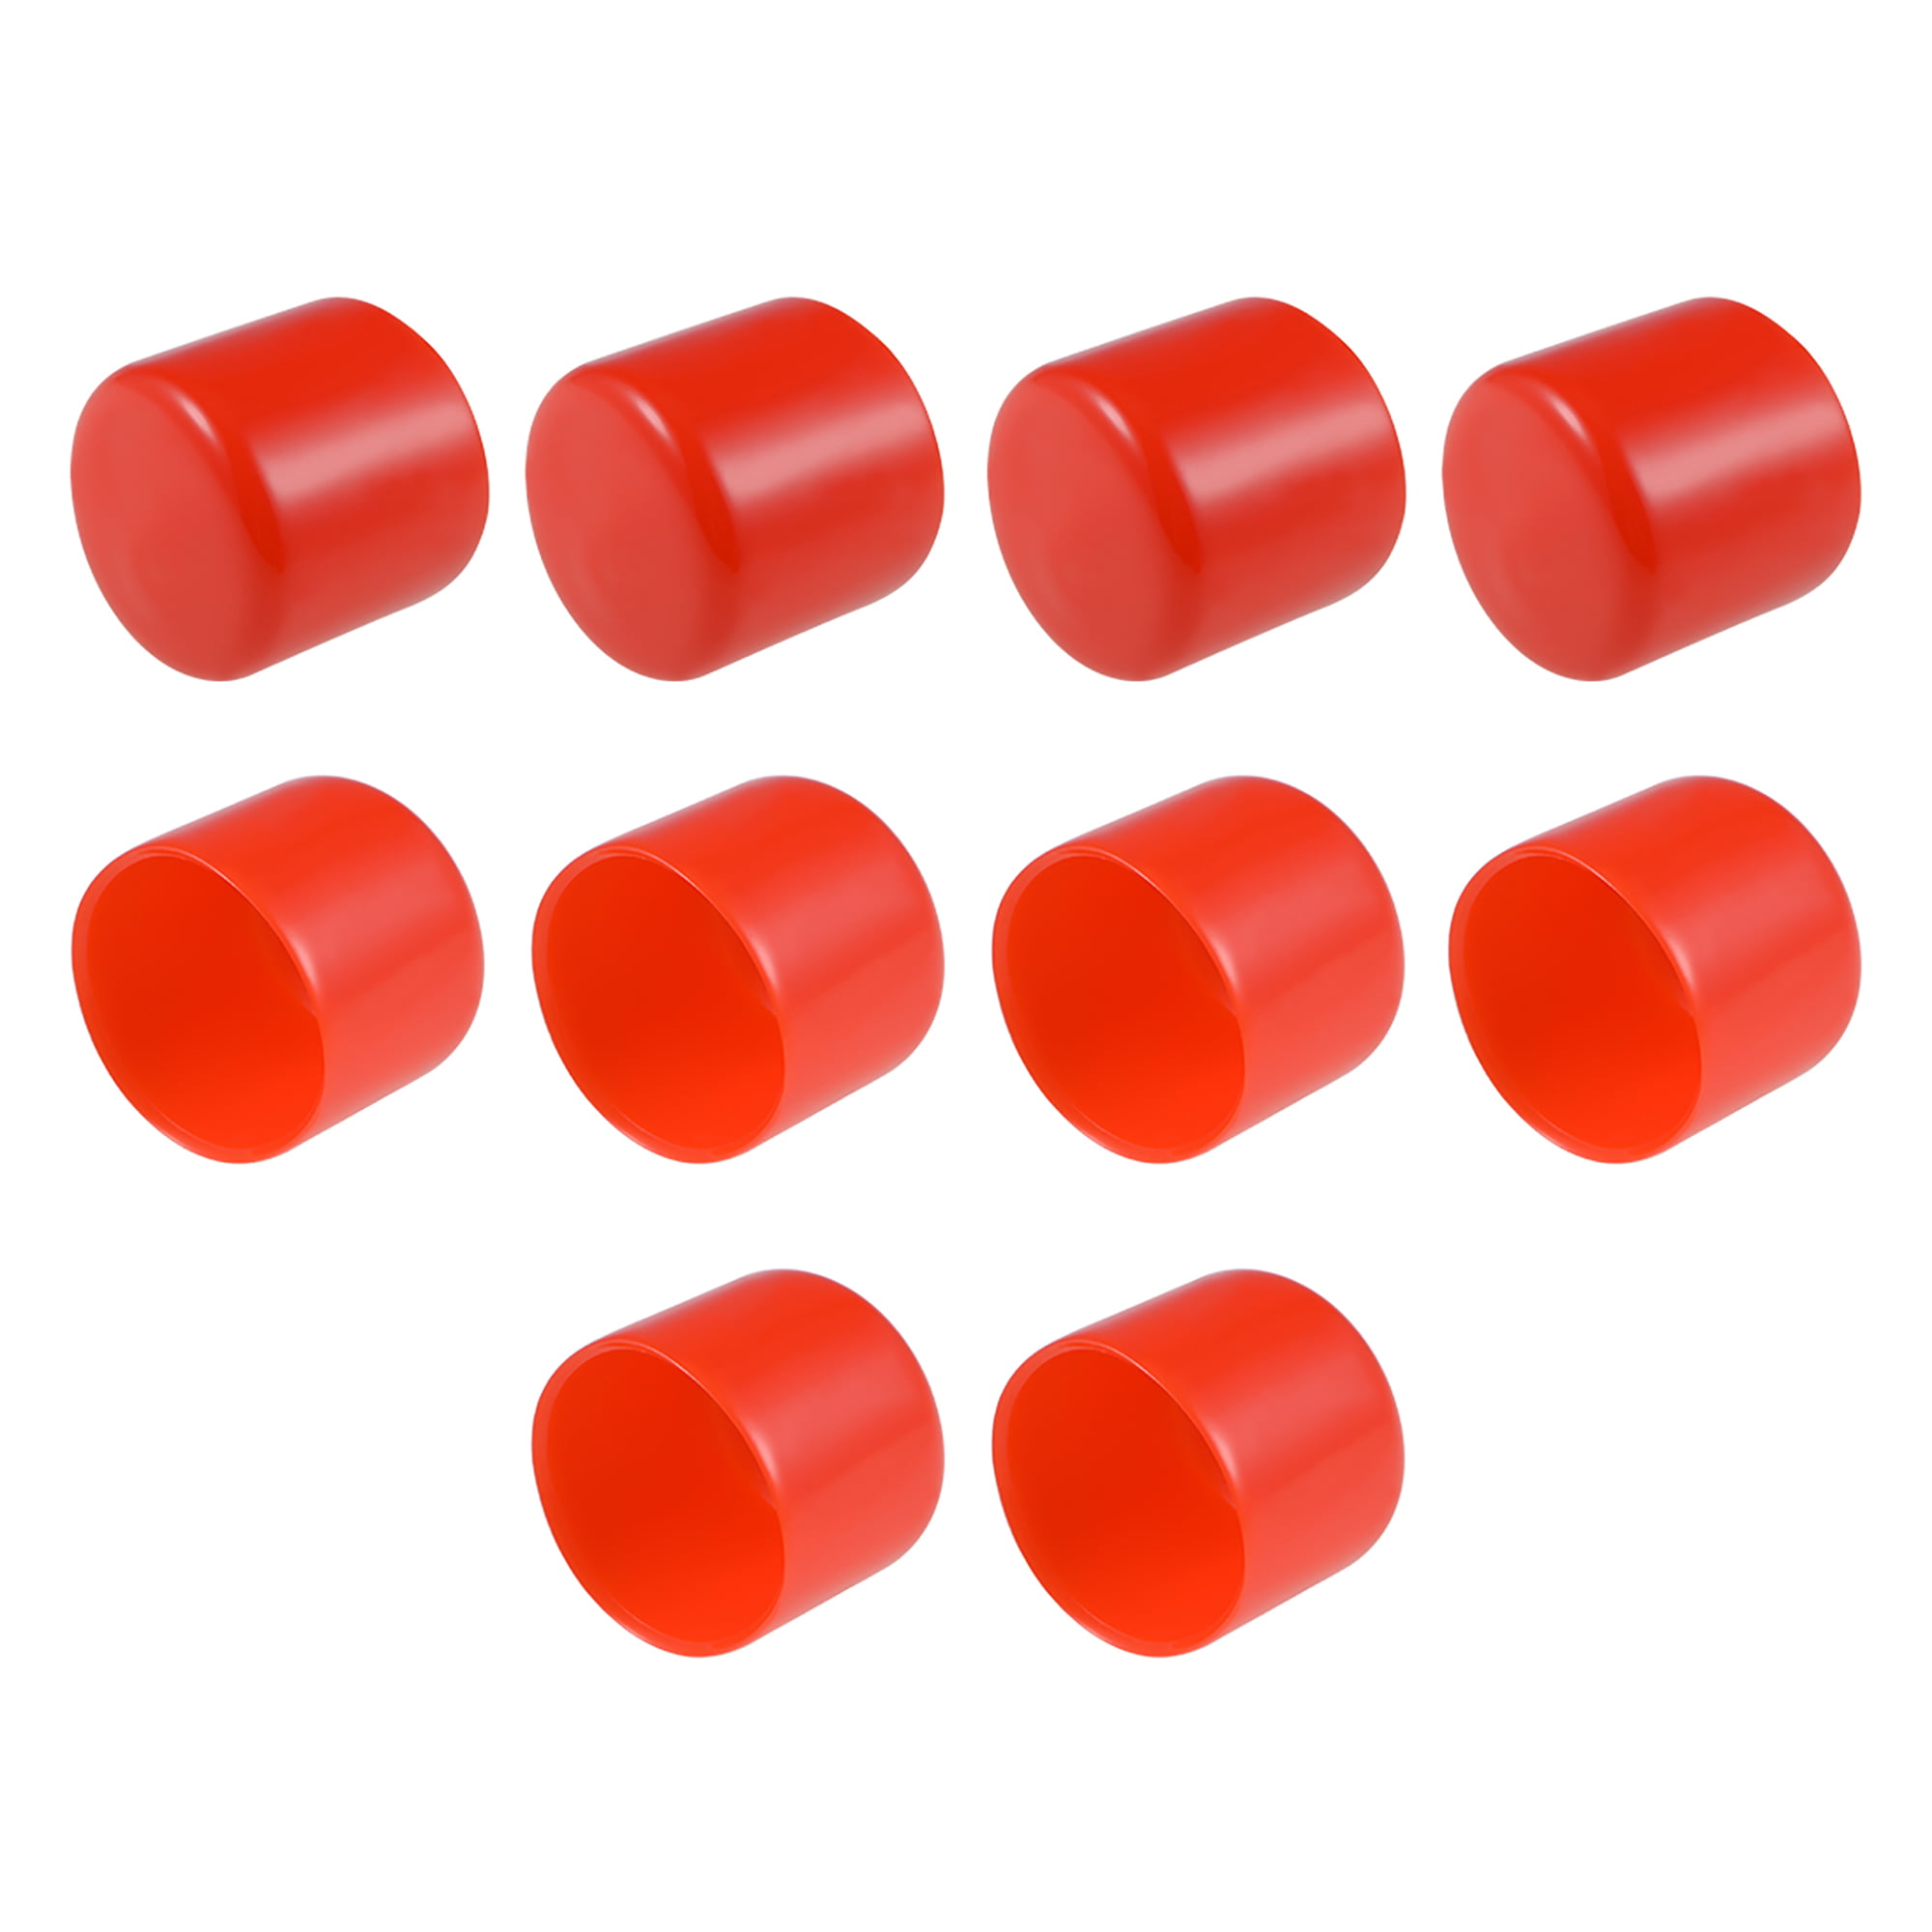 Details about   Screw Thread Protector 30mm ID Round End Cap Cover Red Tube Caps 10pcs